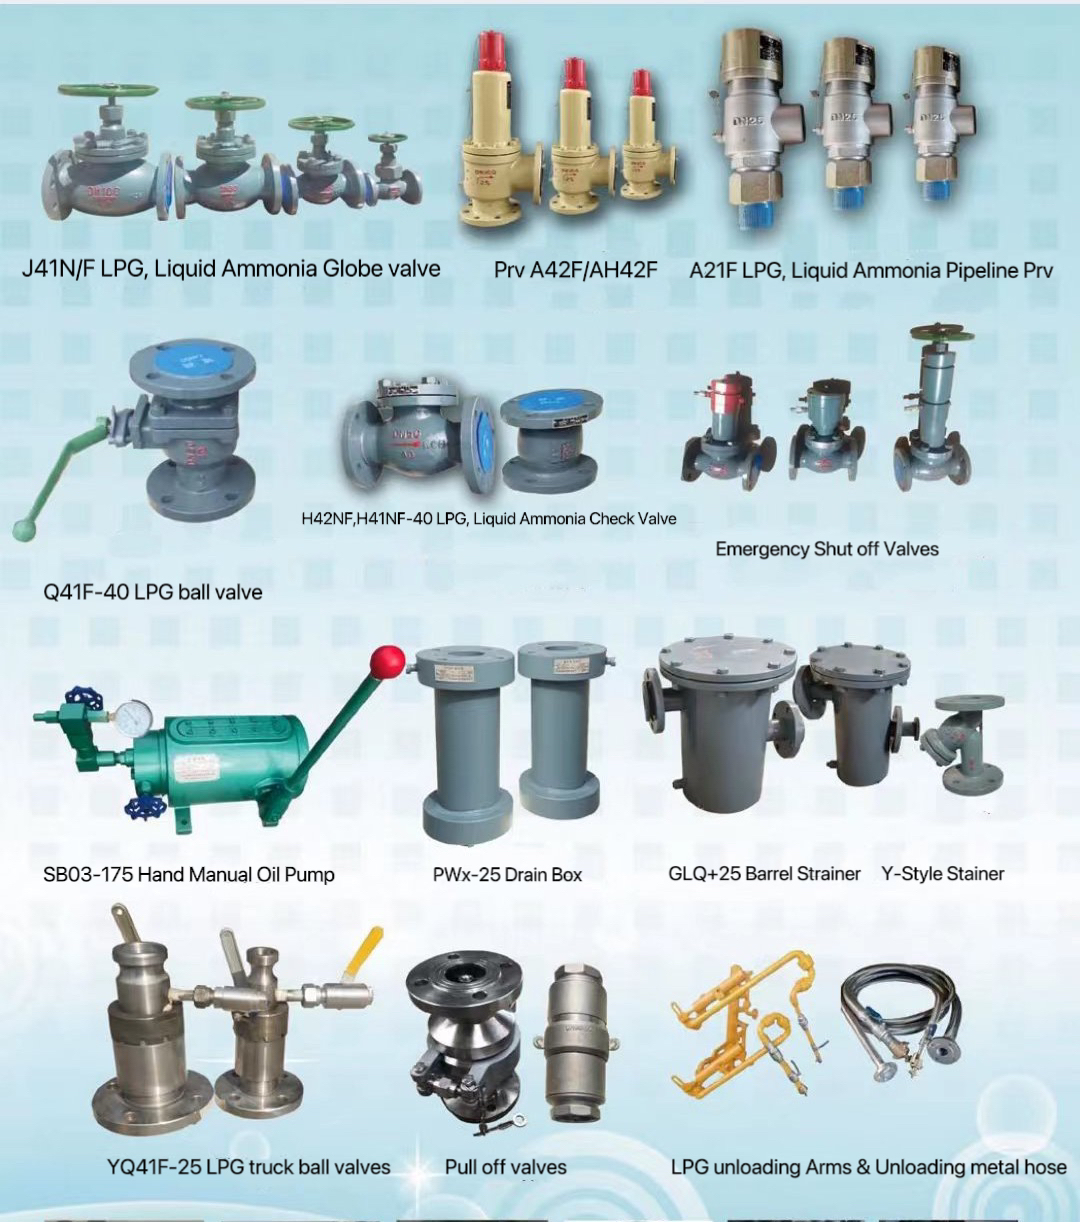 Complete picture of LPG valves